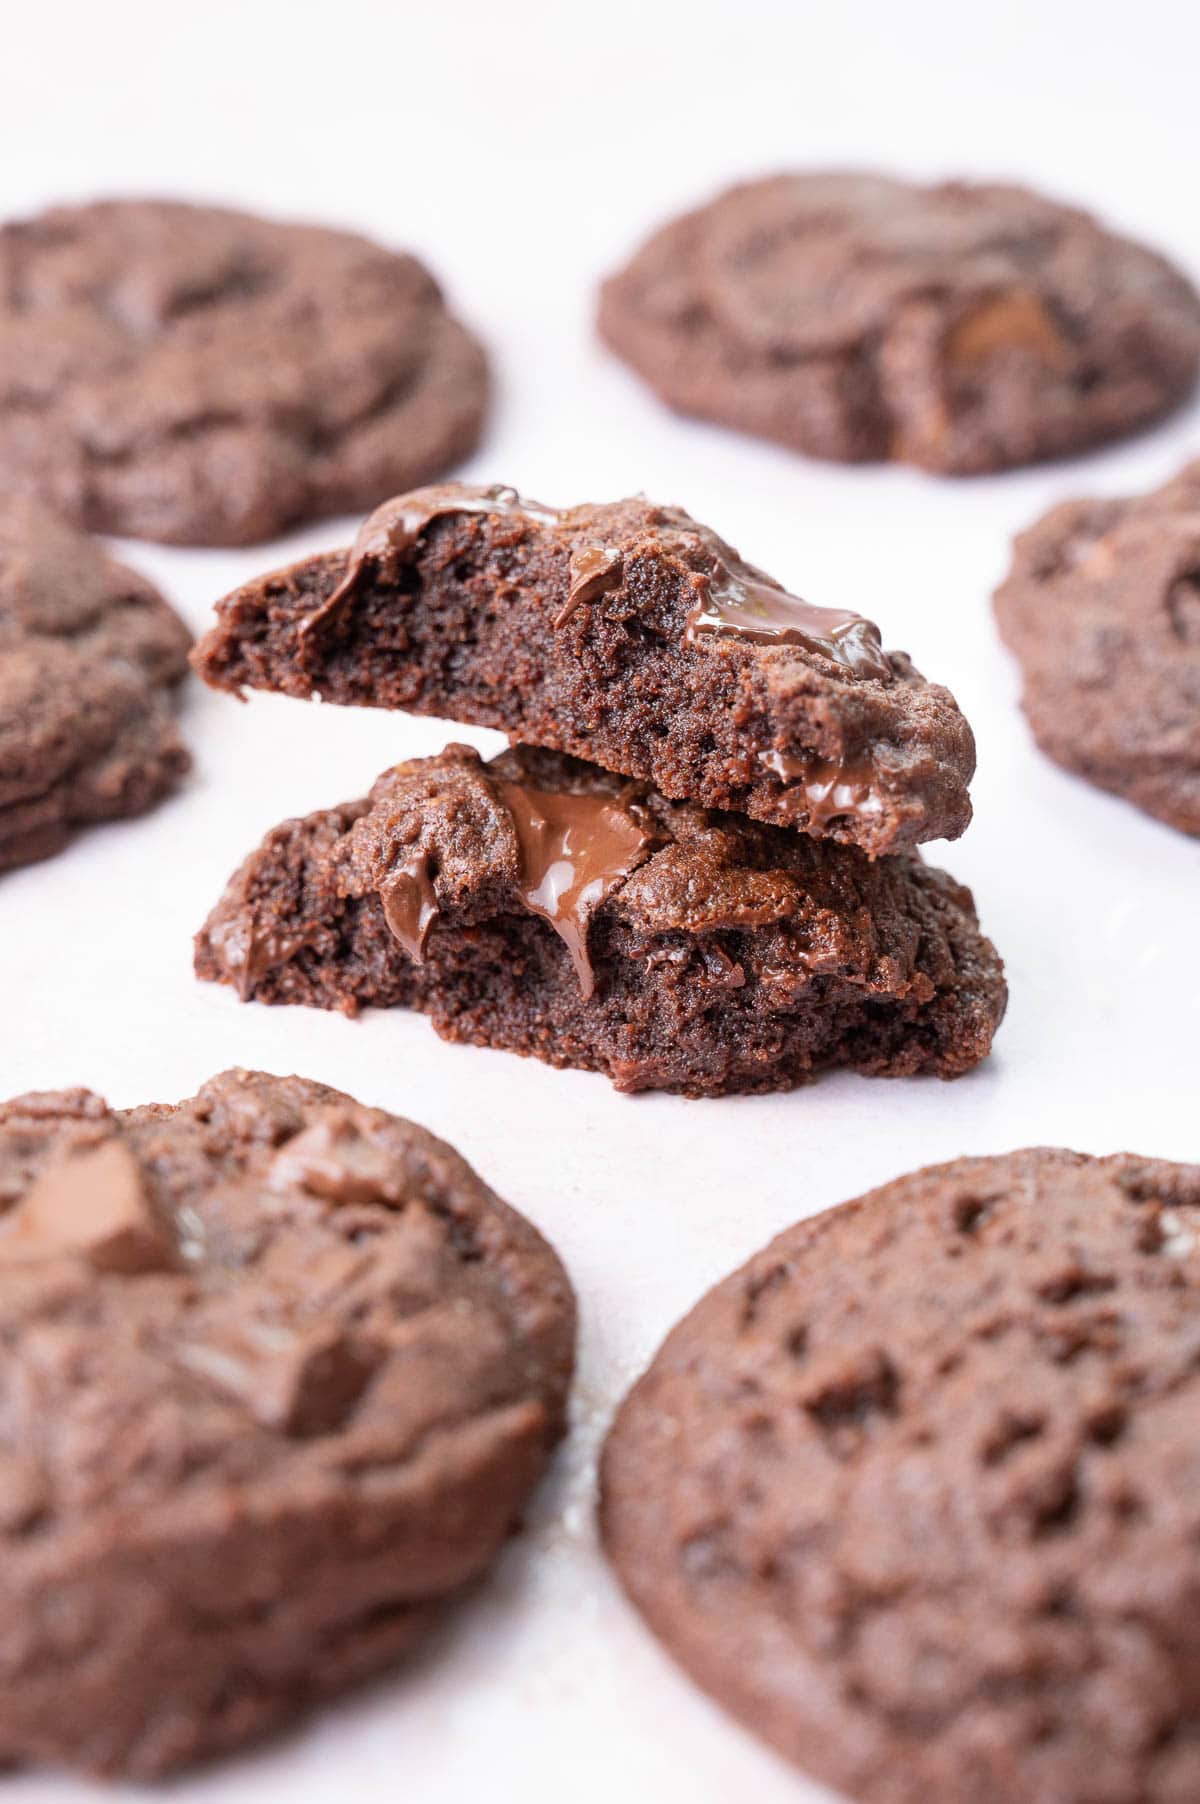 Two halves of double chocolate chip cookies on a light background. More cookies in the background.